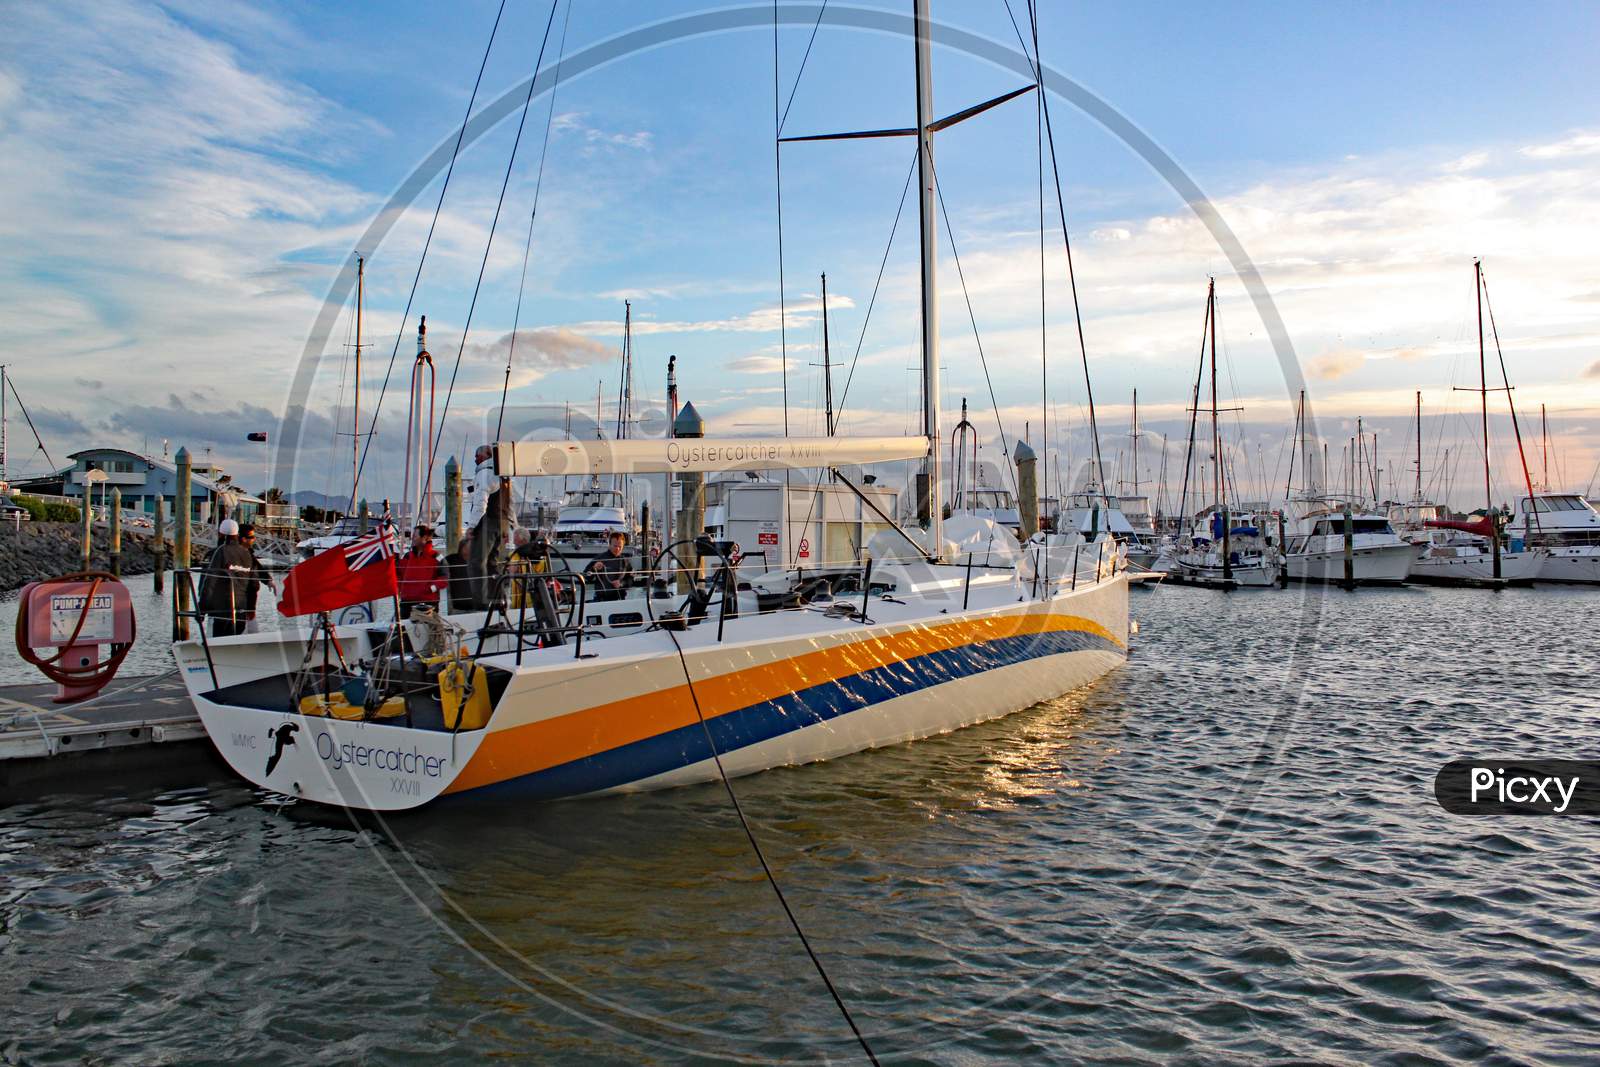 Newly Built Racing Yacht Oystercatcher Xxviii Arrives In The Evening At Tauranga Marina For Shipping To The United States.